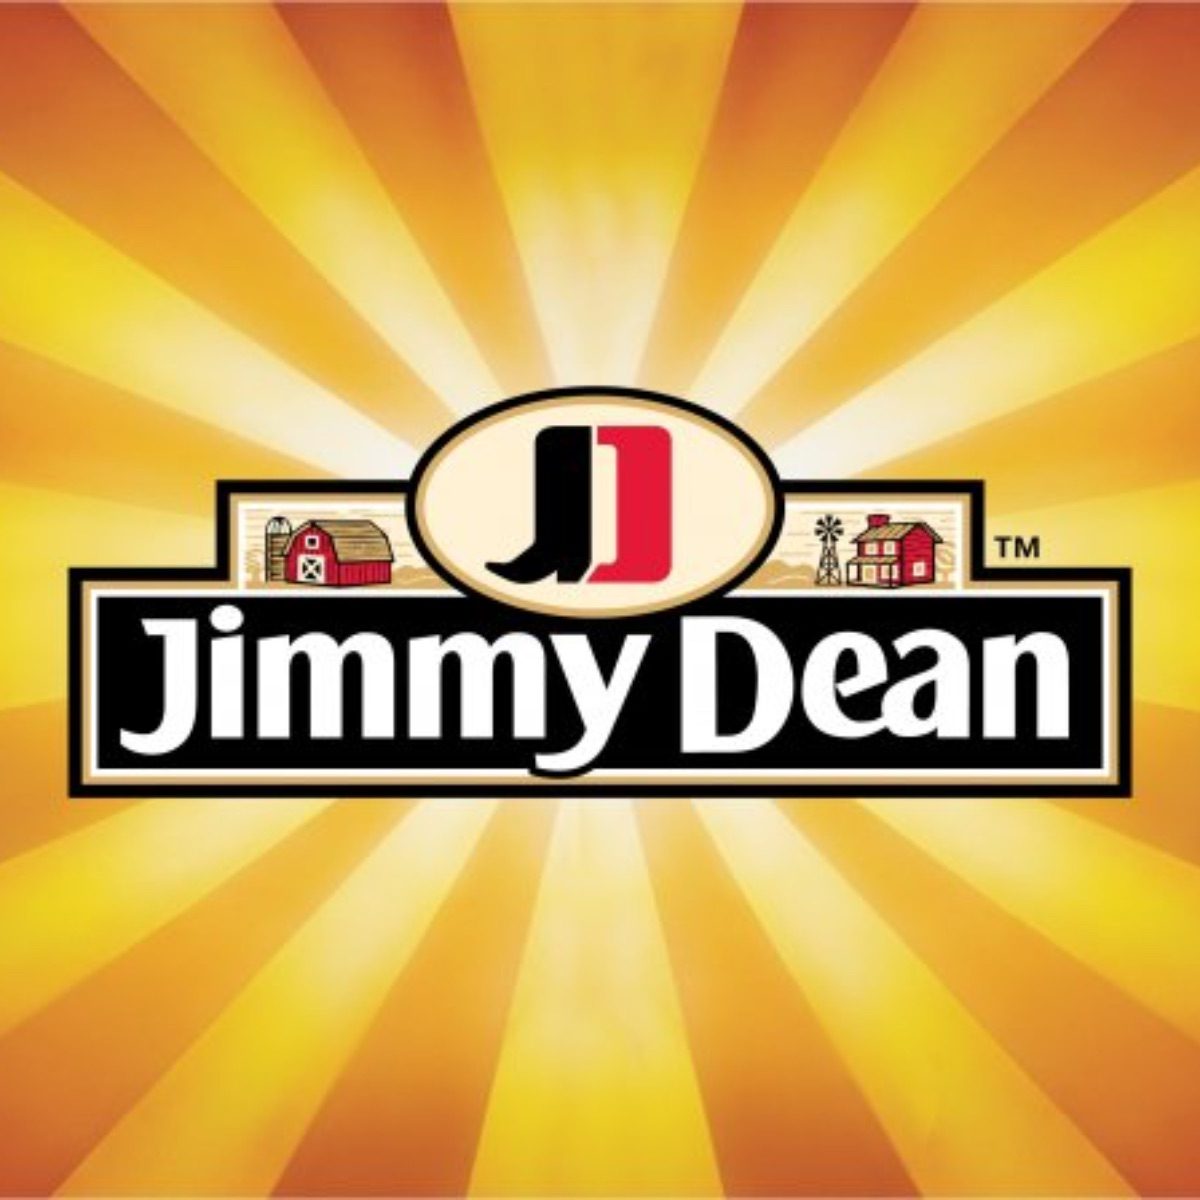 <p><strong><a class="SWhtmlLink" href="https://www.jimmydean.com" rel="noopener">Jimmy Dean Sausage</a> (Tyson Foods), Springdale</strong></p> <p>Before Jimmy Dean was making sausage, he was a hit country star. After years of singing and acting, he became convinced that he could make the best sausage around. So, he ditched his career and teamed up with his brother to become the company's main salesman.</p> <p><a class="SWhtmlLink" href="https://www.tasteofhome.com/collection/famous-food-brand-figures-in-real-life/" rel="noopener">Here's what Jimmy Dean looked like in real life!</a></p>